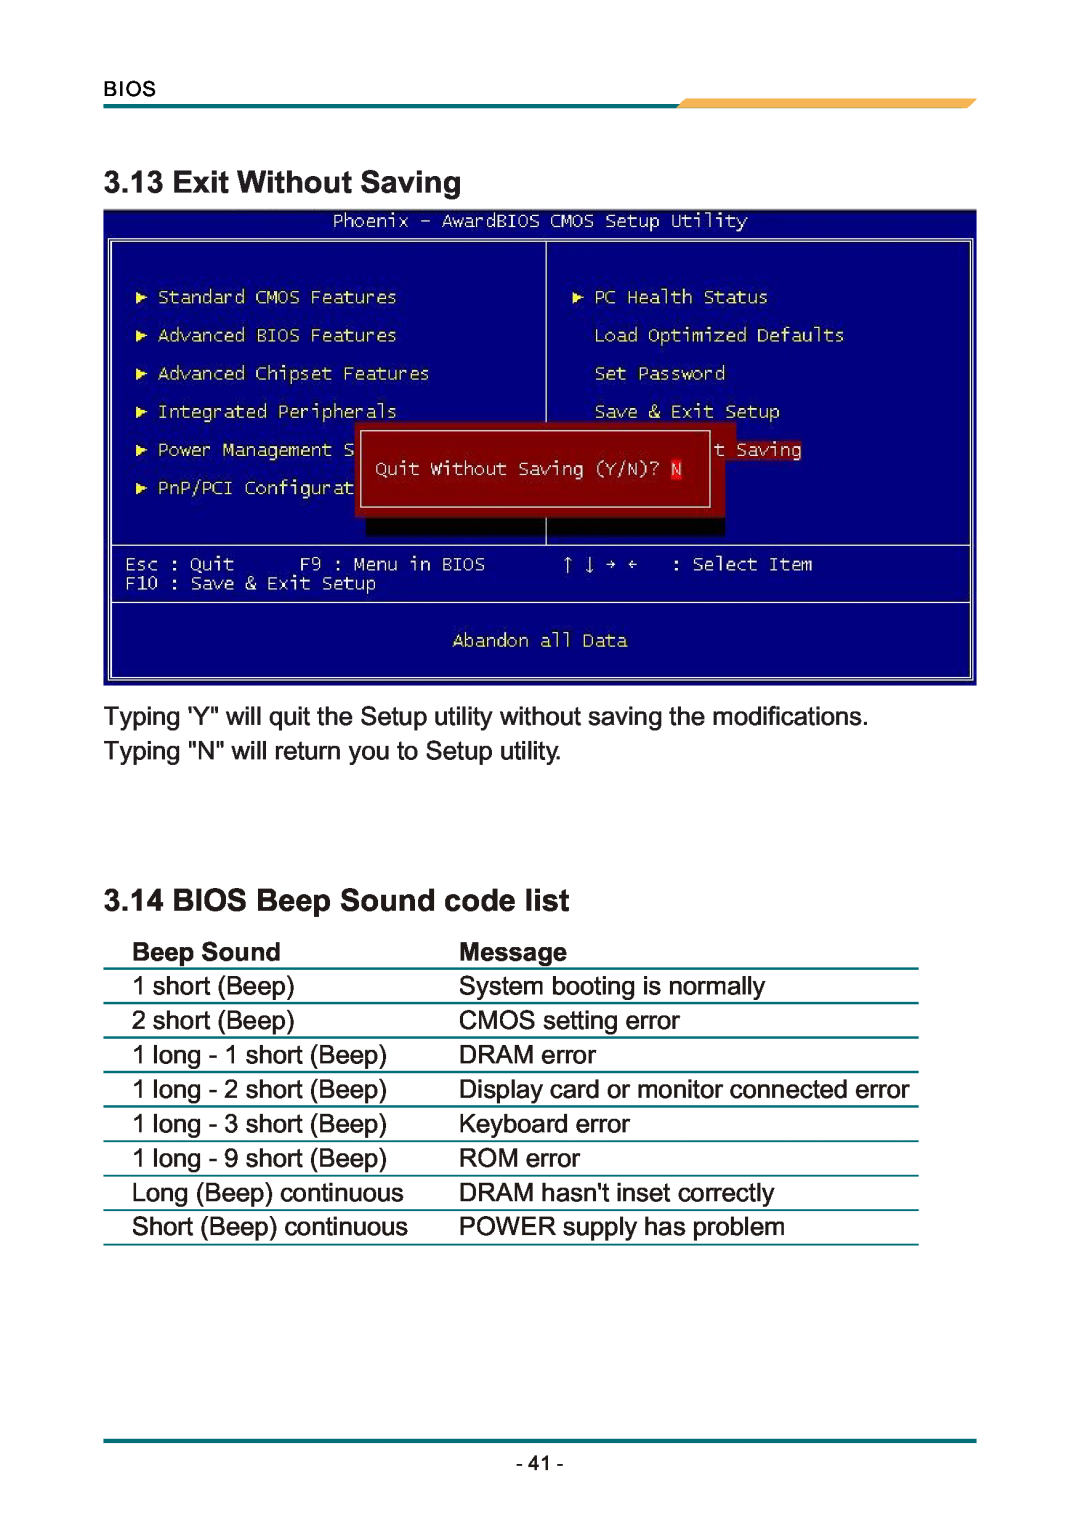 AMD SBX-5363 manual Exit Without Saving, BIOS Beep Sound code list, Message 